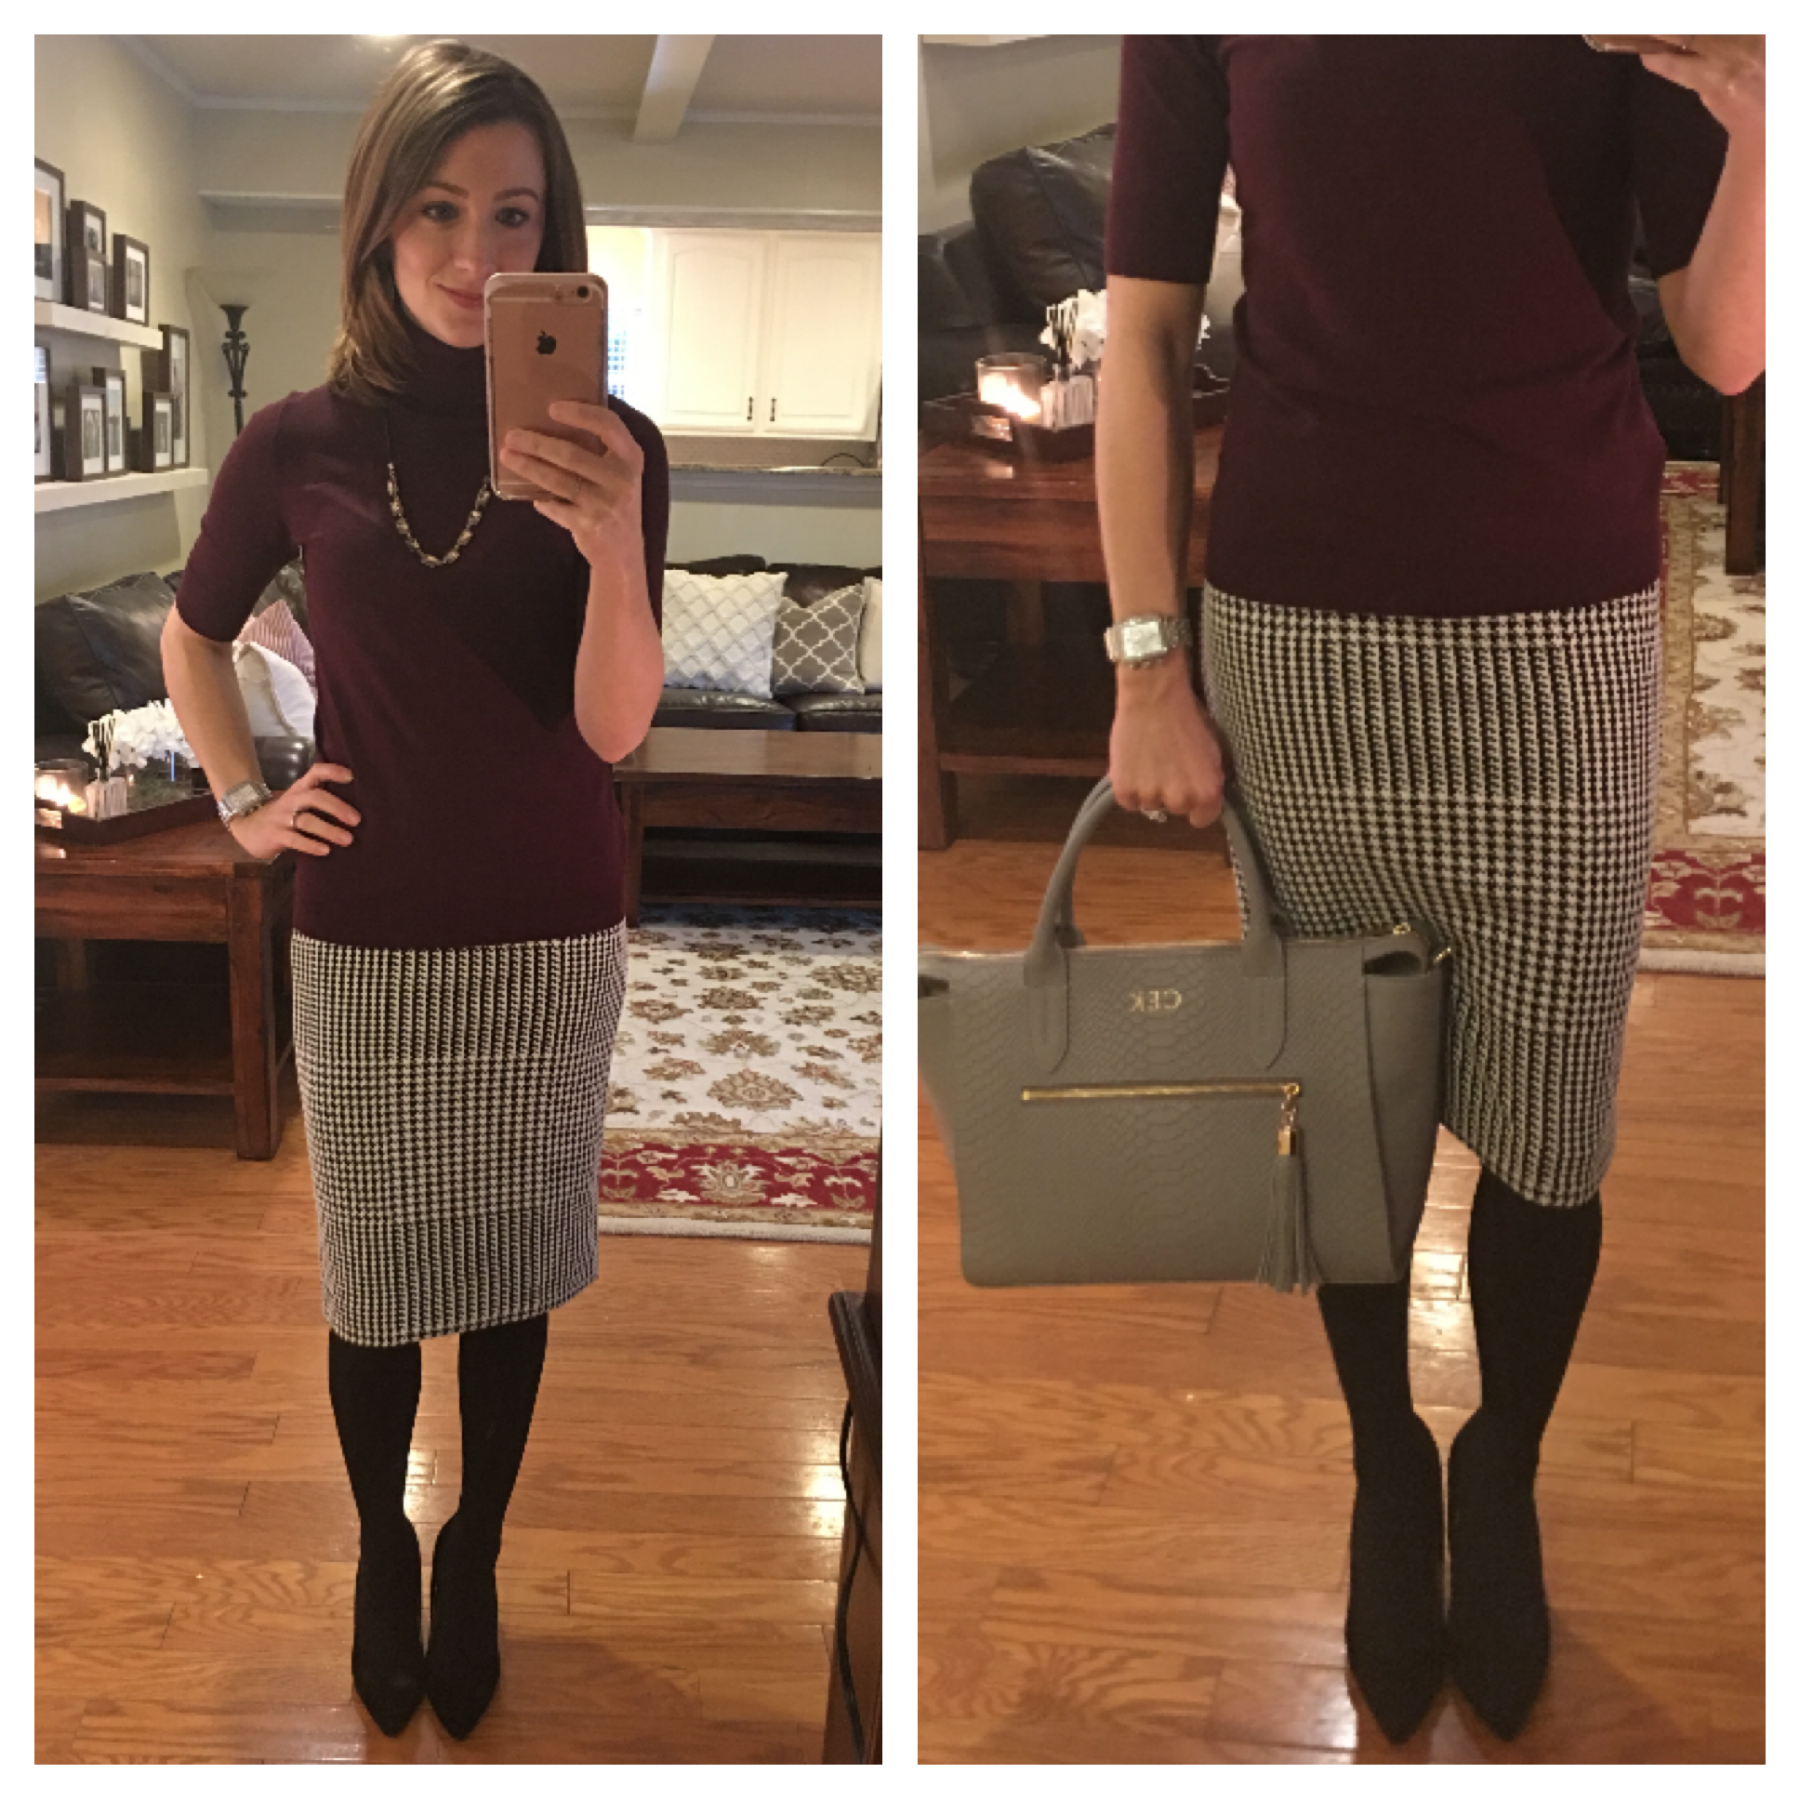 Here's yesterday's dress and some other Lularoe makeovers